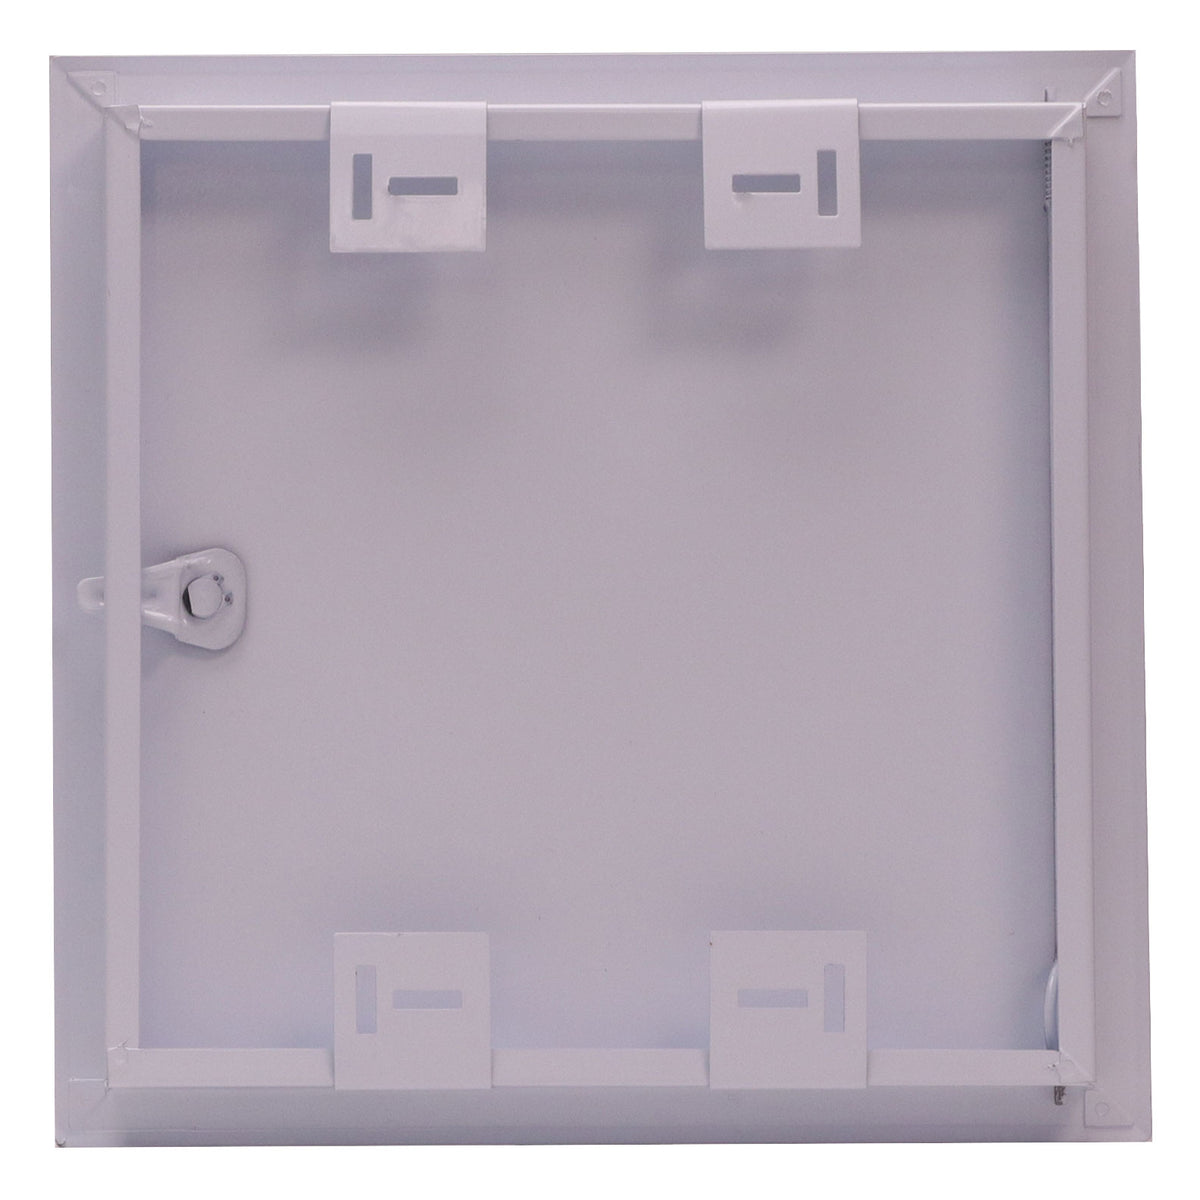 24&quot; X 24&quot; Steel Access Panel Removable Door For Concealed Wall / Ceiling Application With Slotted Lock - [Outer Dimensions: 25&quot; Width X 25&quot; Height]